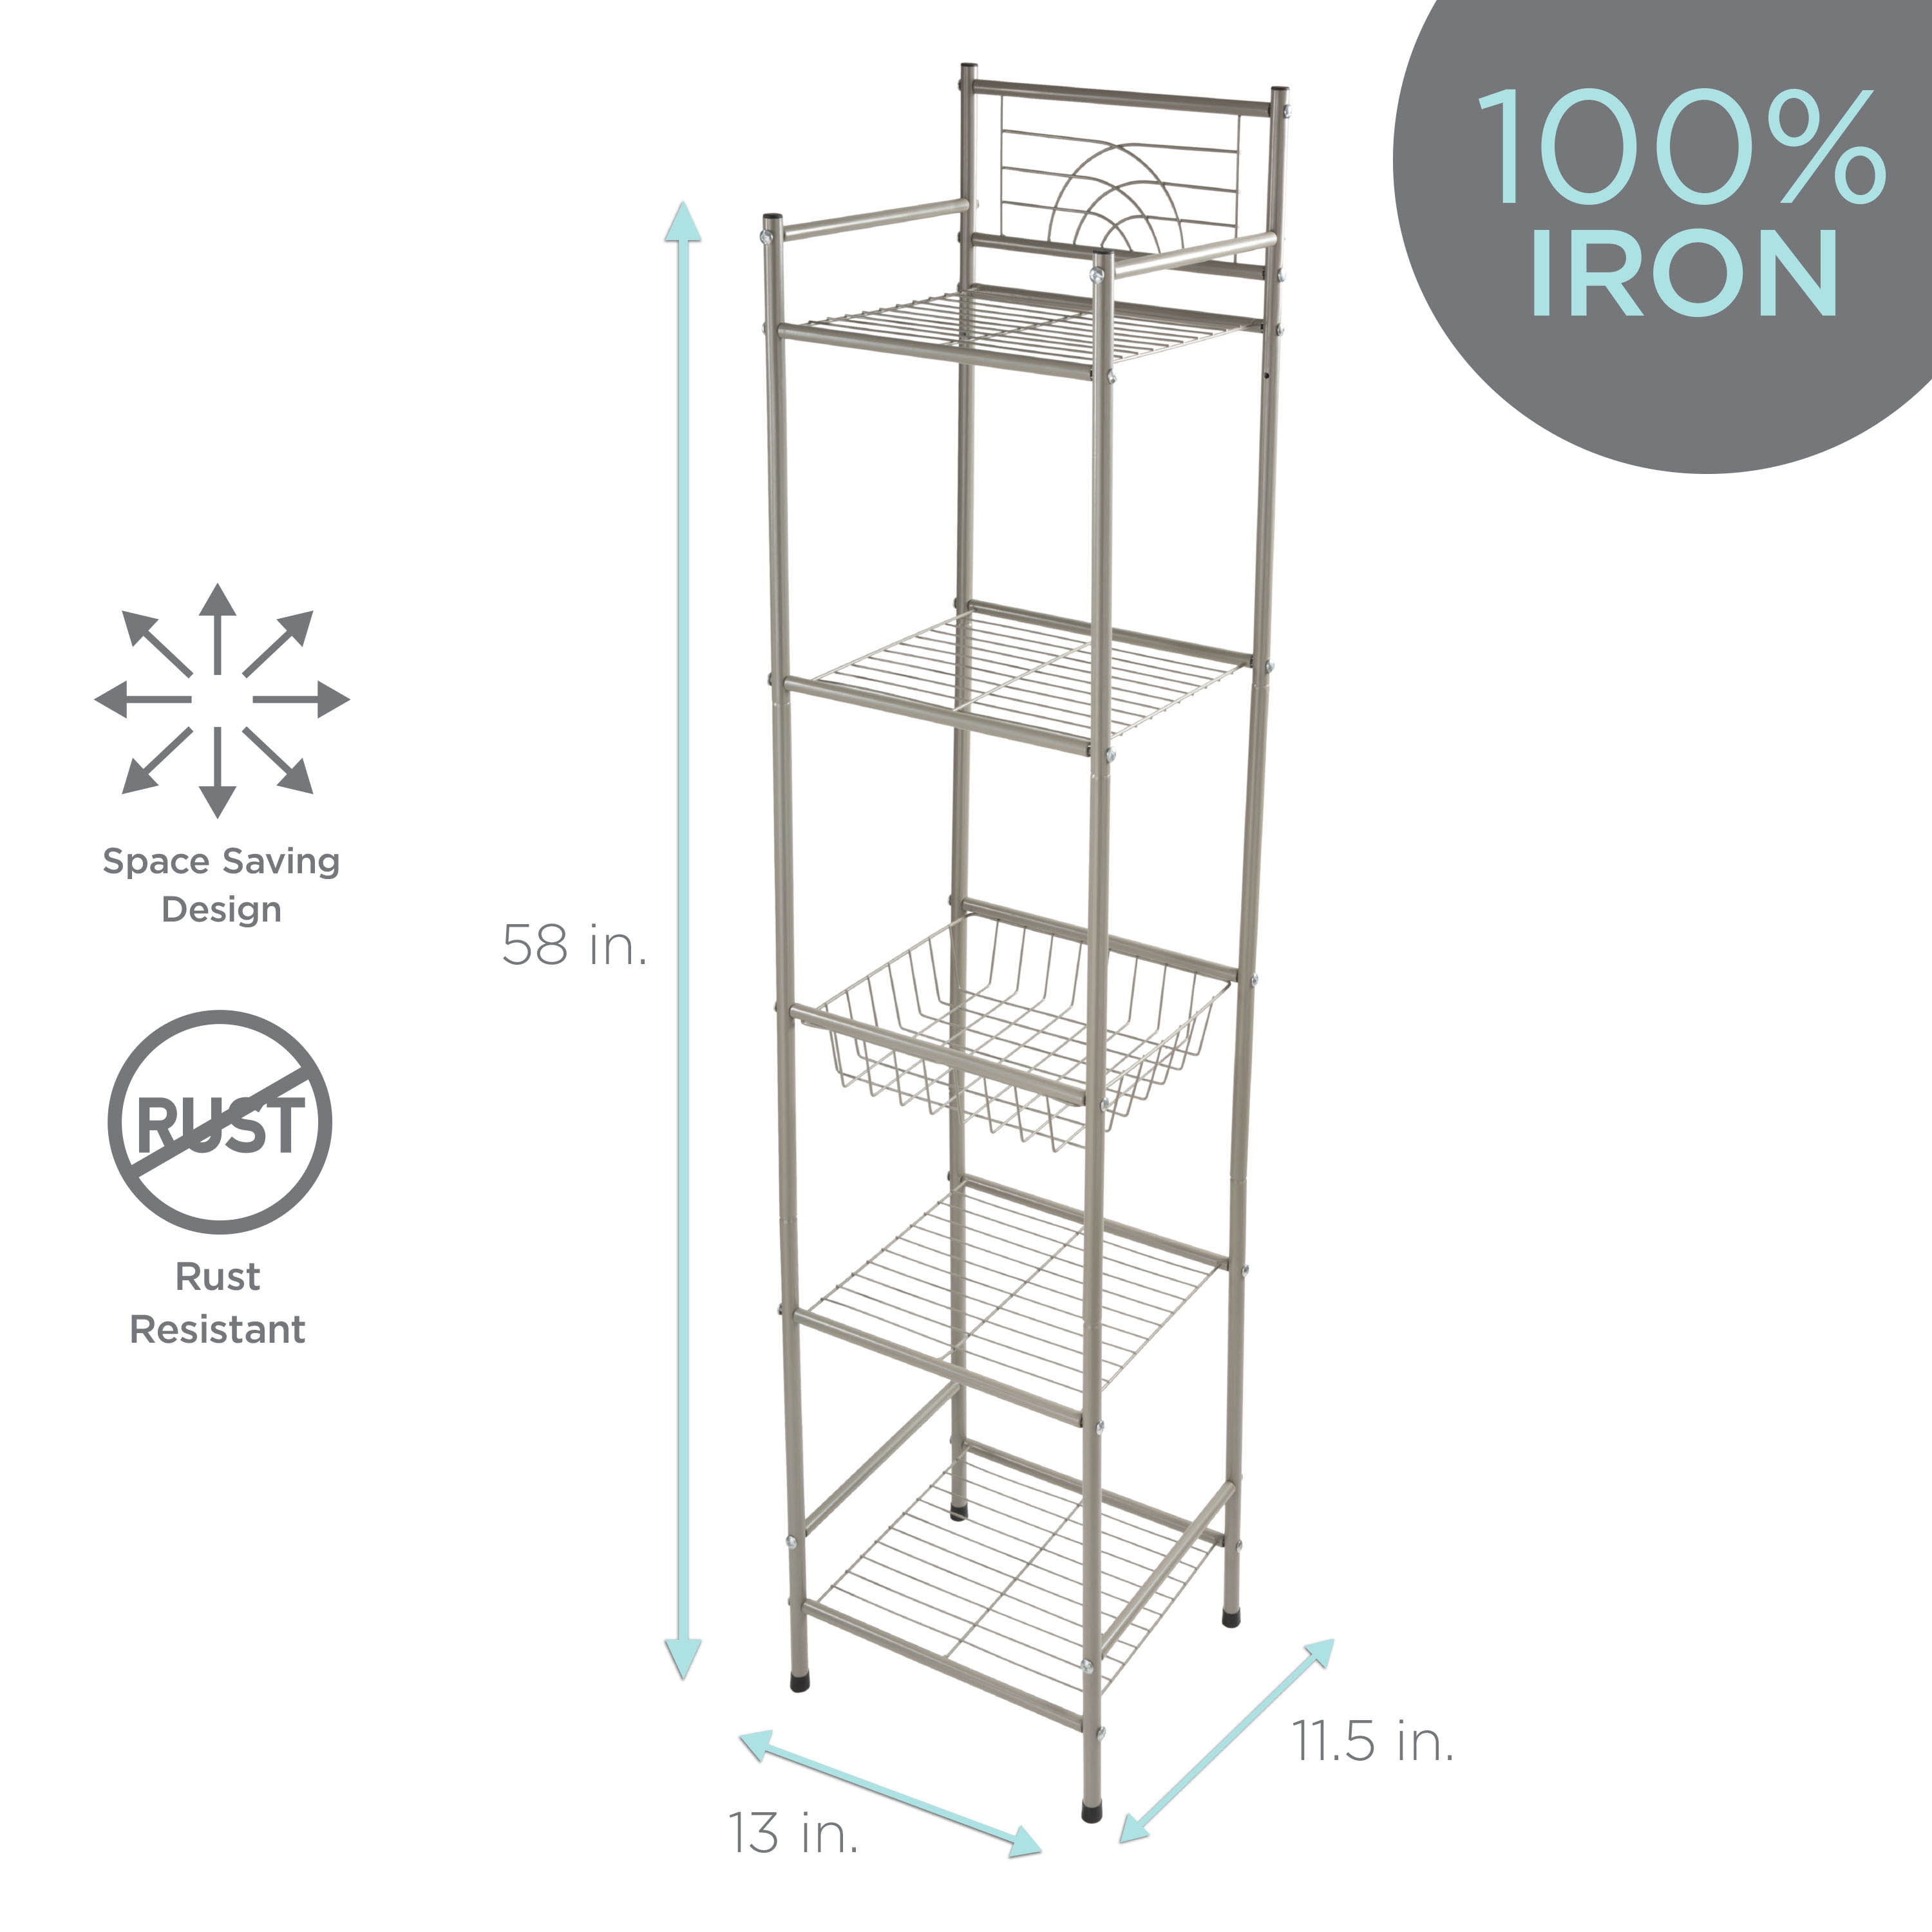 VASAGLE Bathroom Shelves, 5-Tier Storage Rack, Standing Shelf Units, Plant  Flower Stand, 15.6 x 12.2 x 51 Inches, for Living Room, Balcony, Kitchen,  Metal Frame, 12.2”D x 15.6”W x 51”H, Rustic Brown +